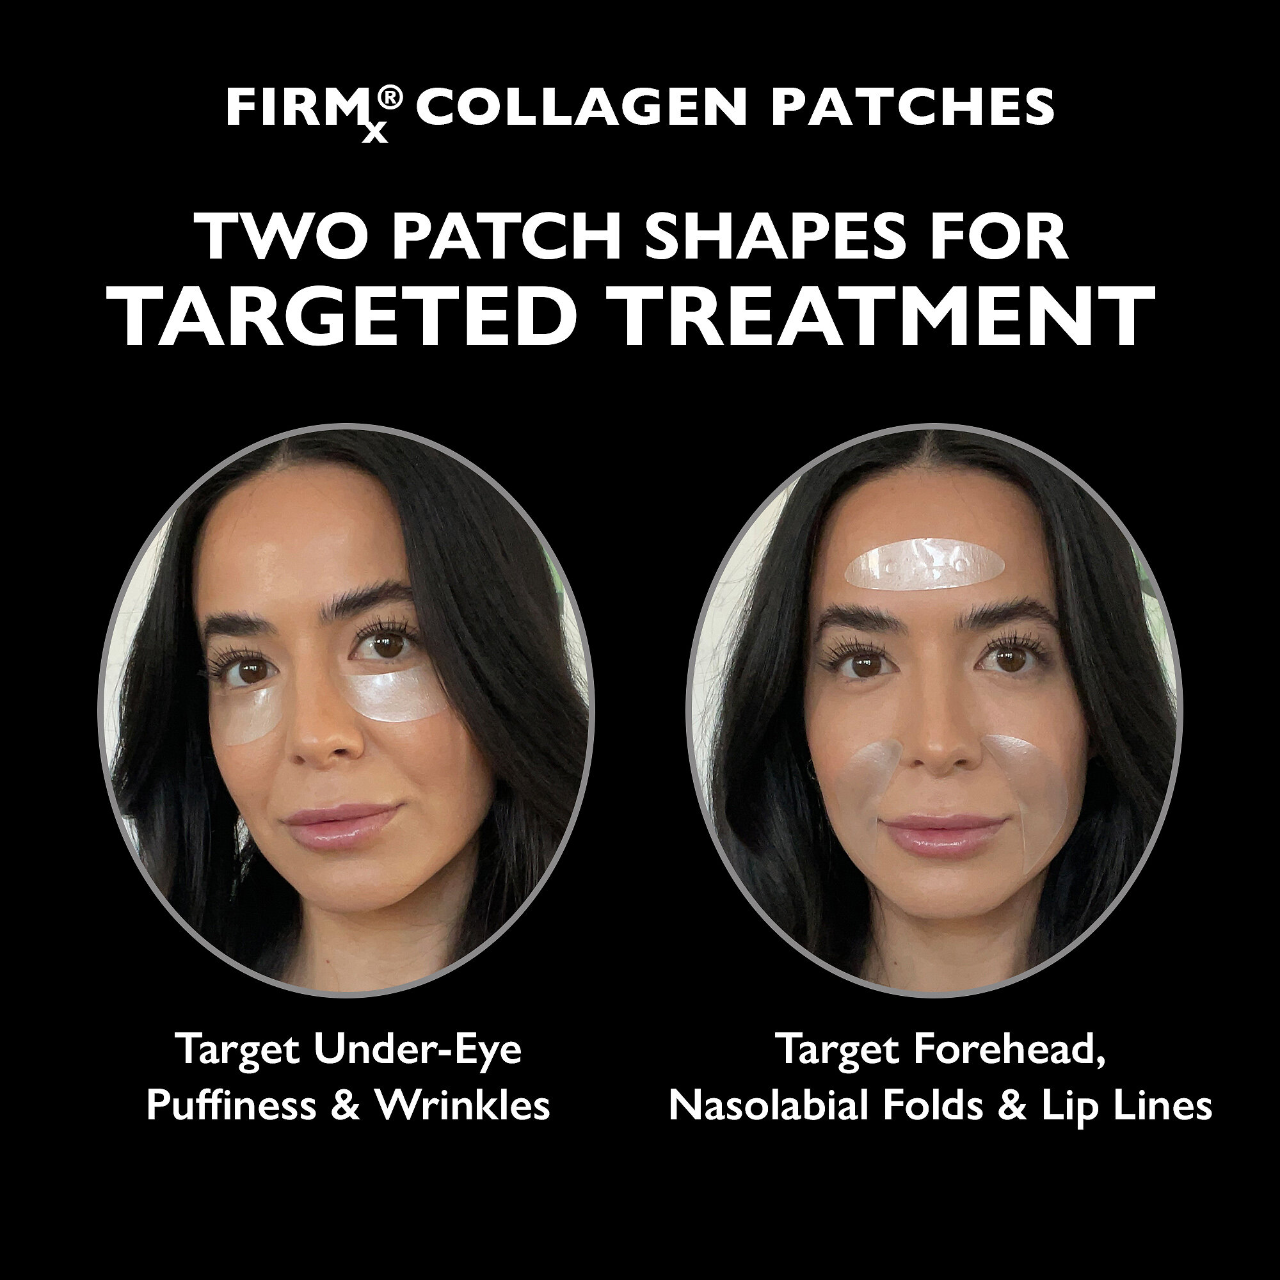 Peter Thomas Roth Full-Size FIRMx Face & Eye Firmers 2-Piece Kit